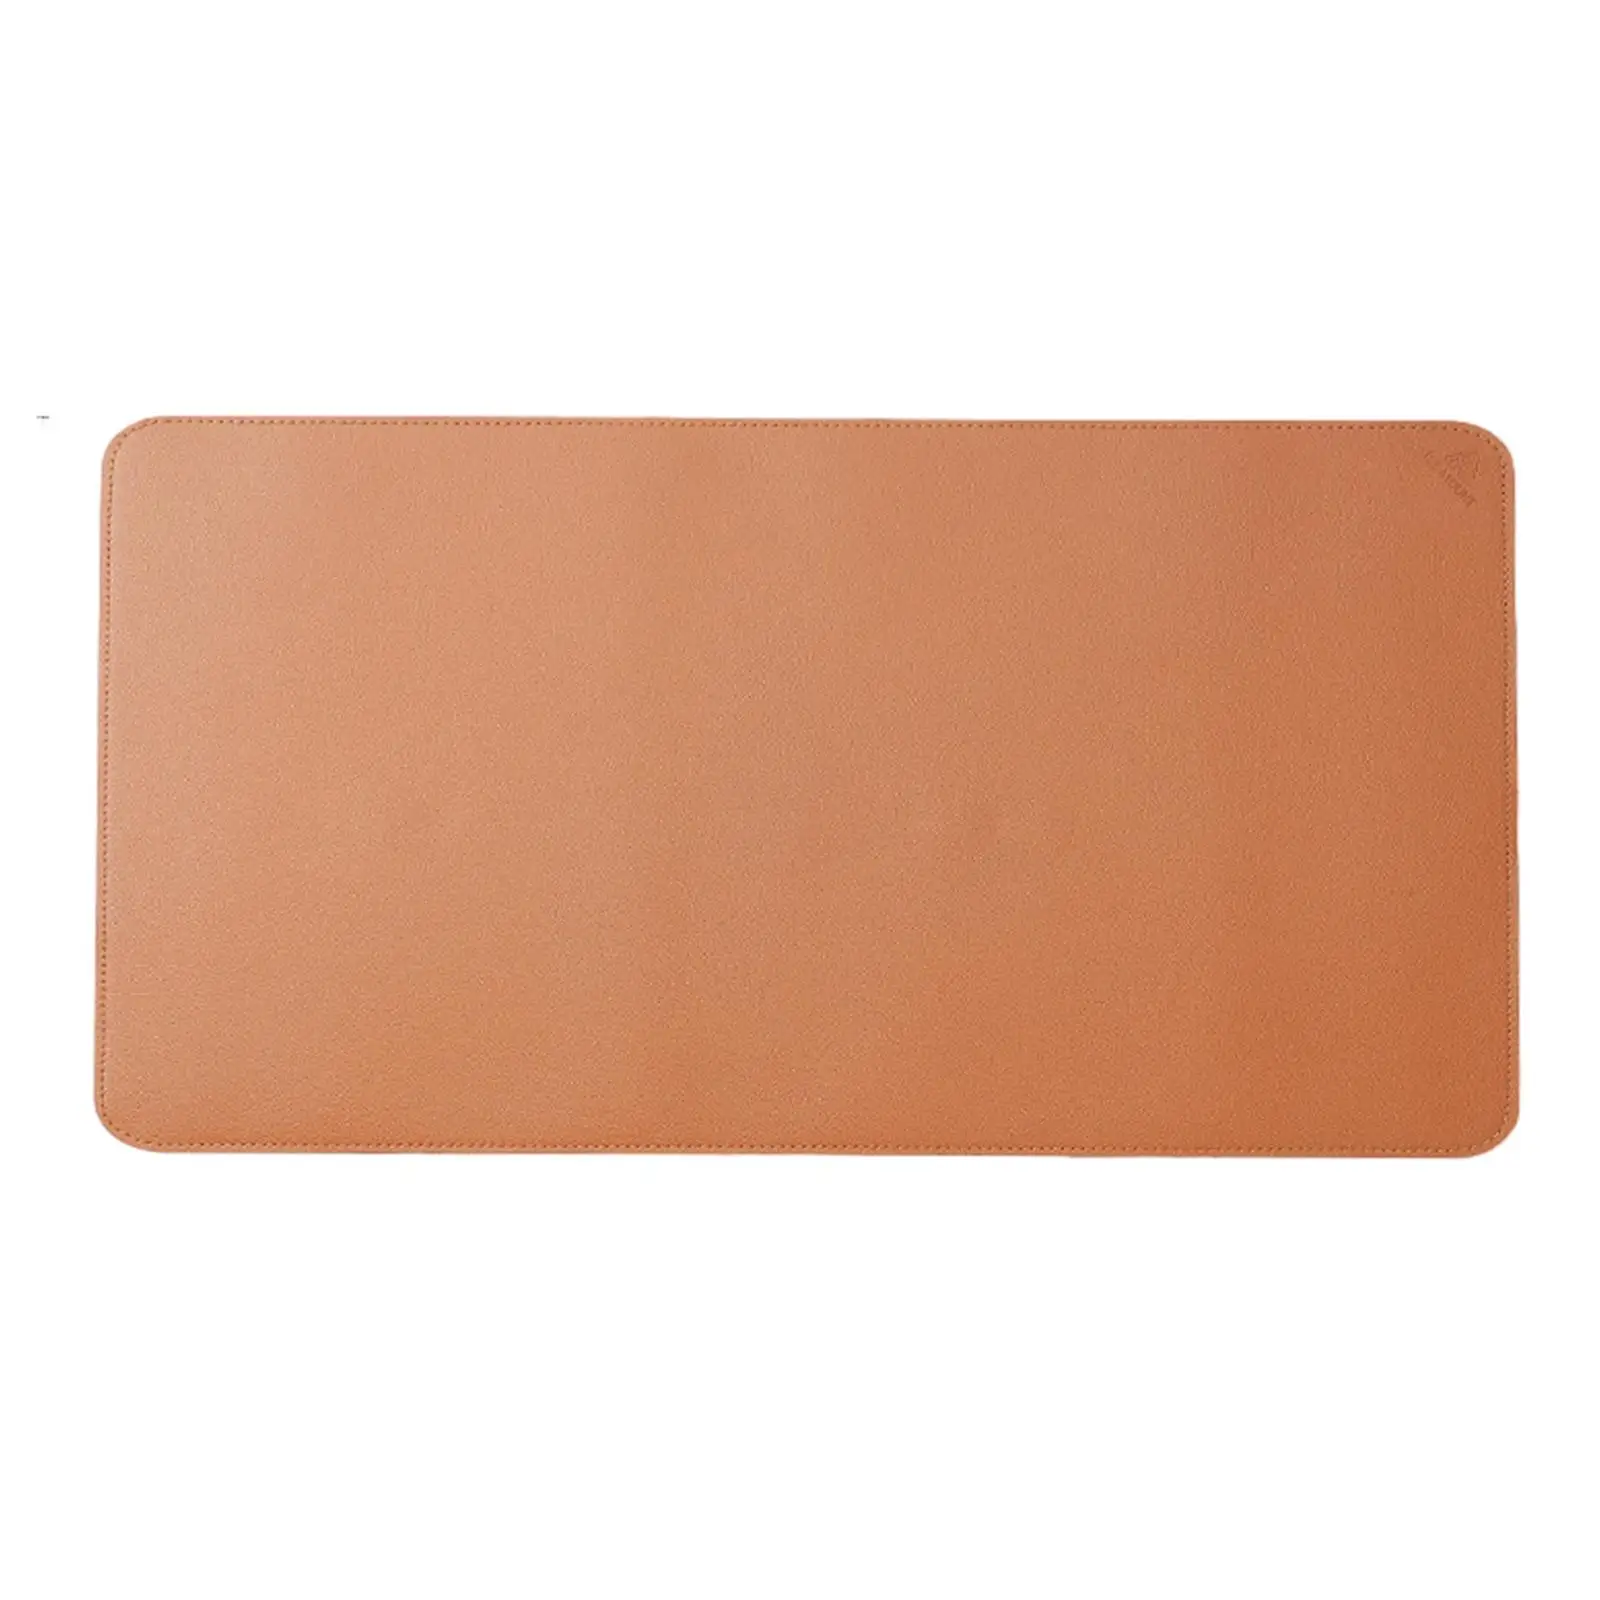 PU Leather Table Mat Rectangle Desk Mat Waterproof Flooring Meal Mat Table Cover for Hiking Camping Event Party Kitchen Bbq